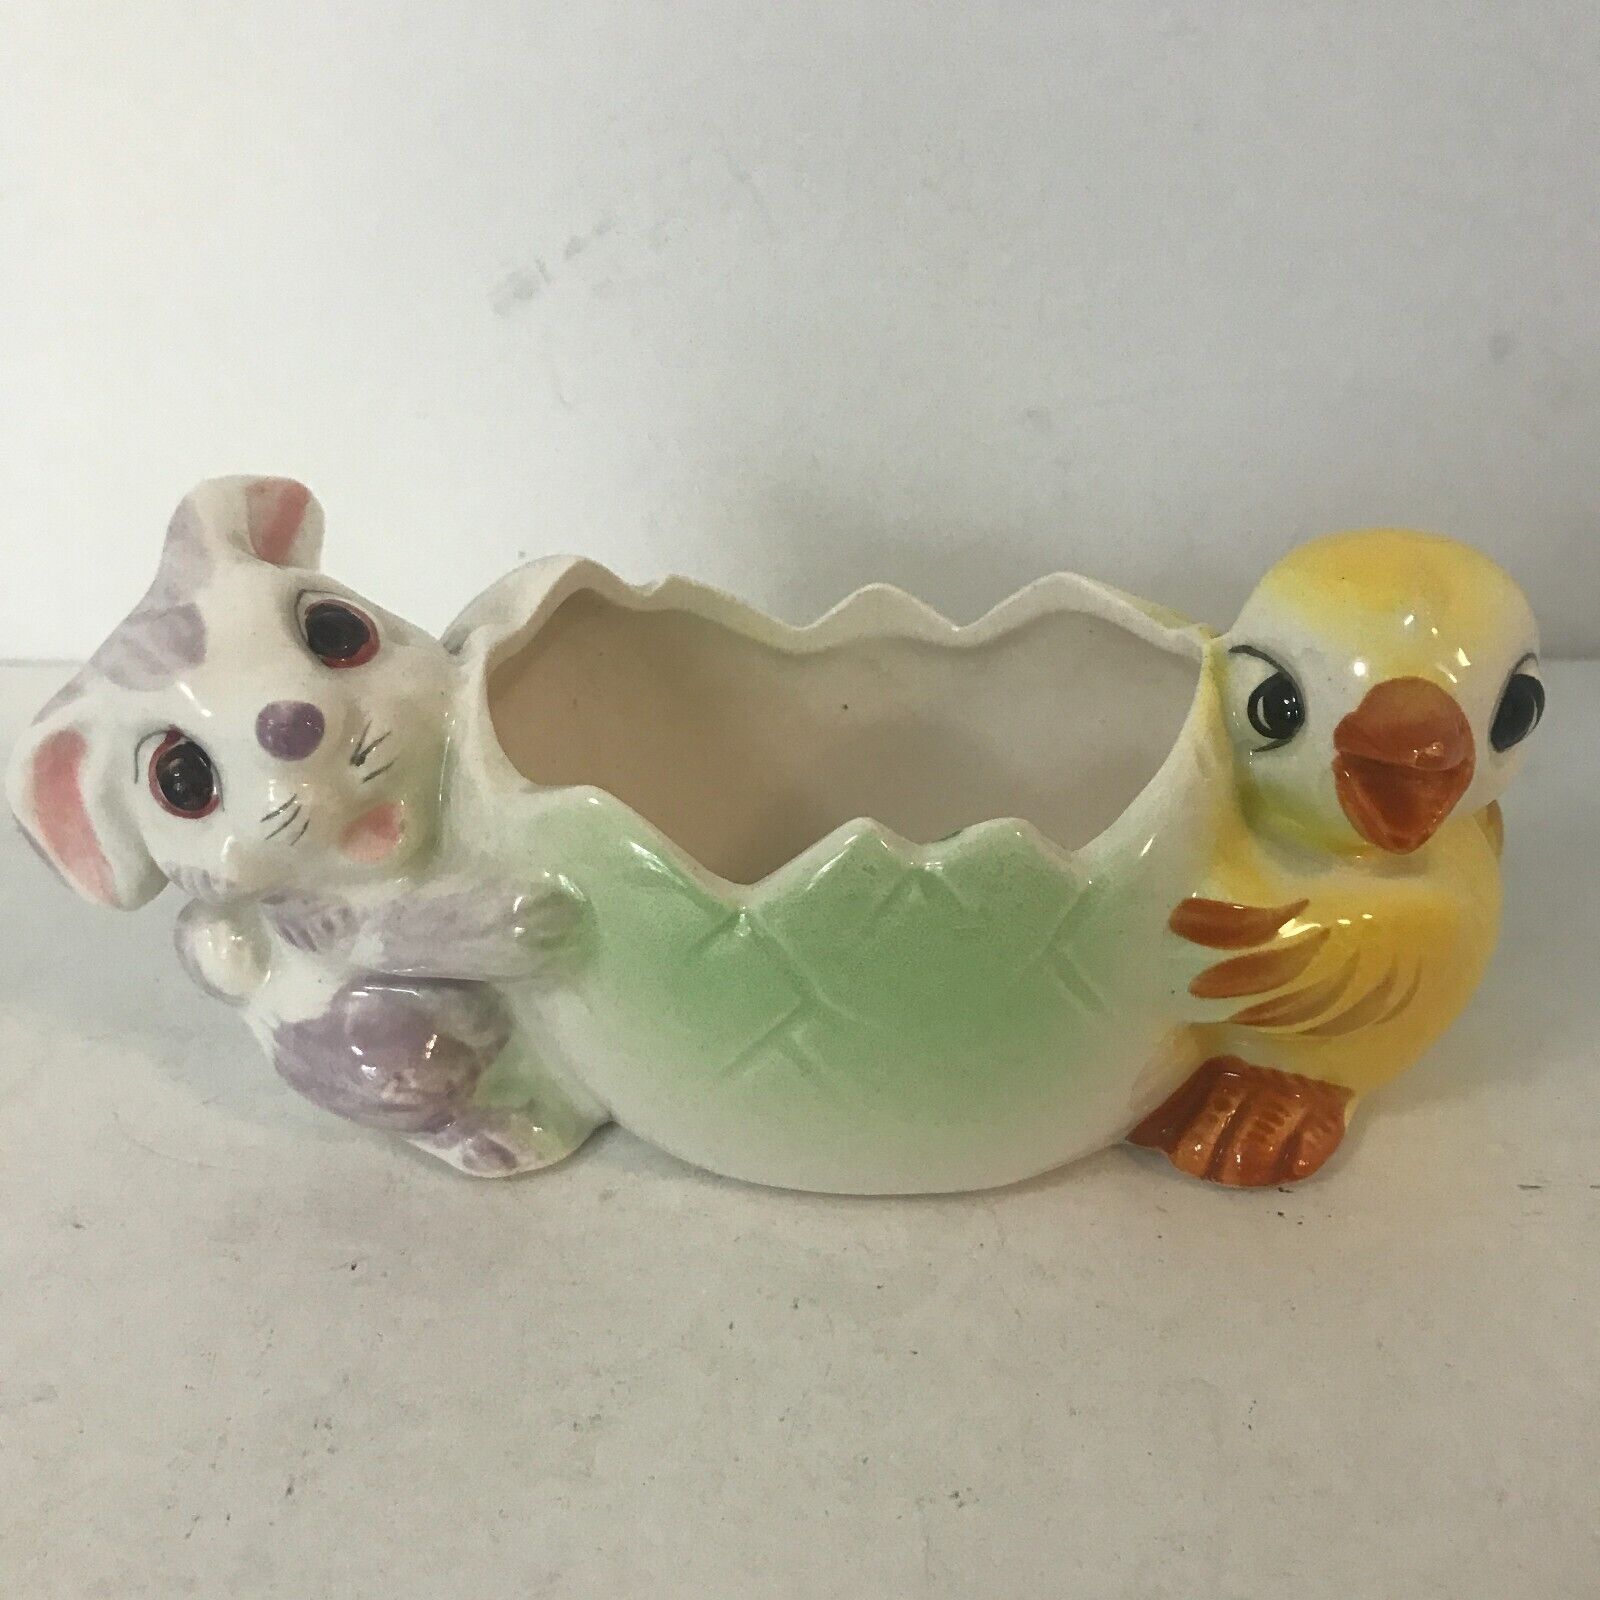 Vintage Bunny and Chick Ceramic Planter 6.5x2.5